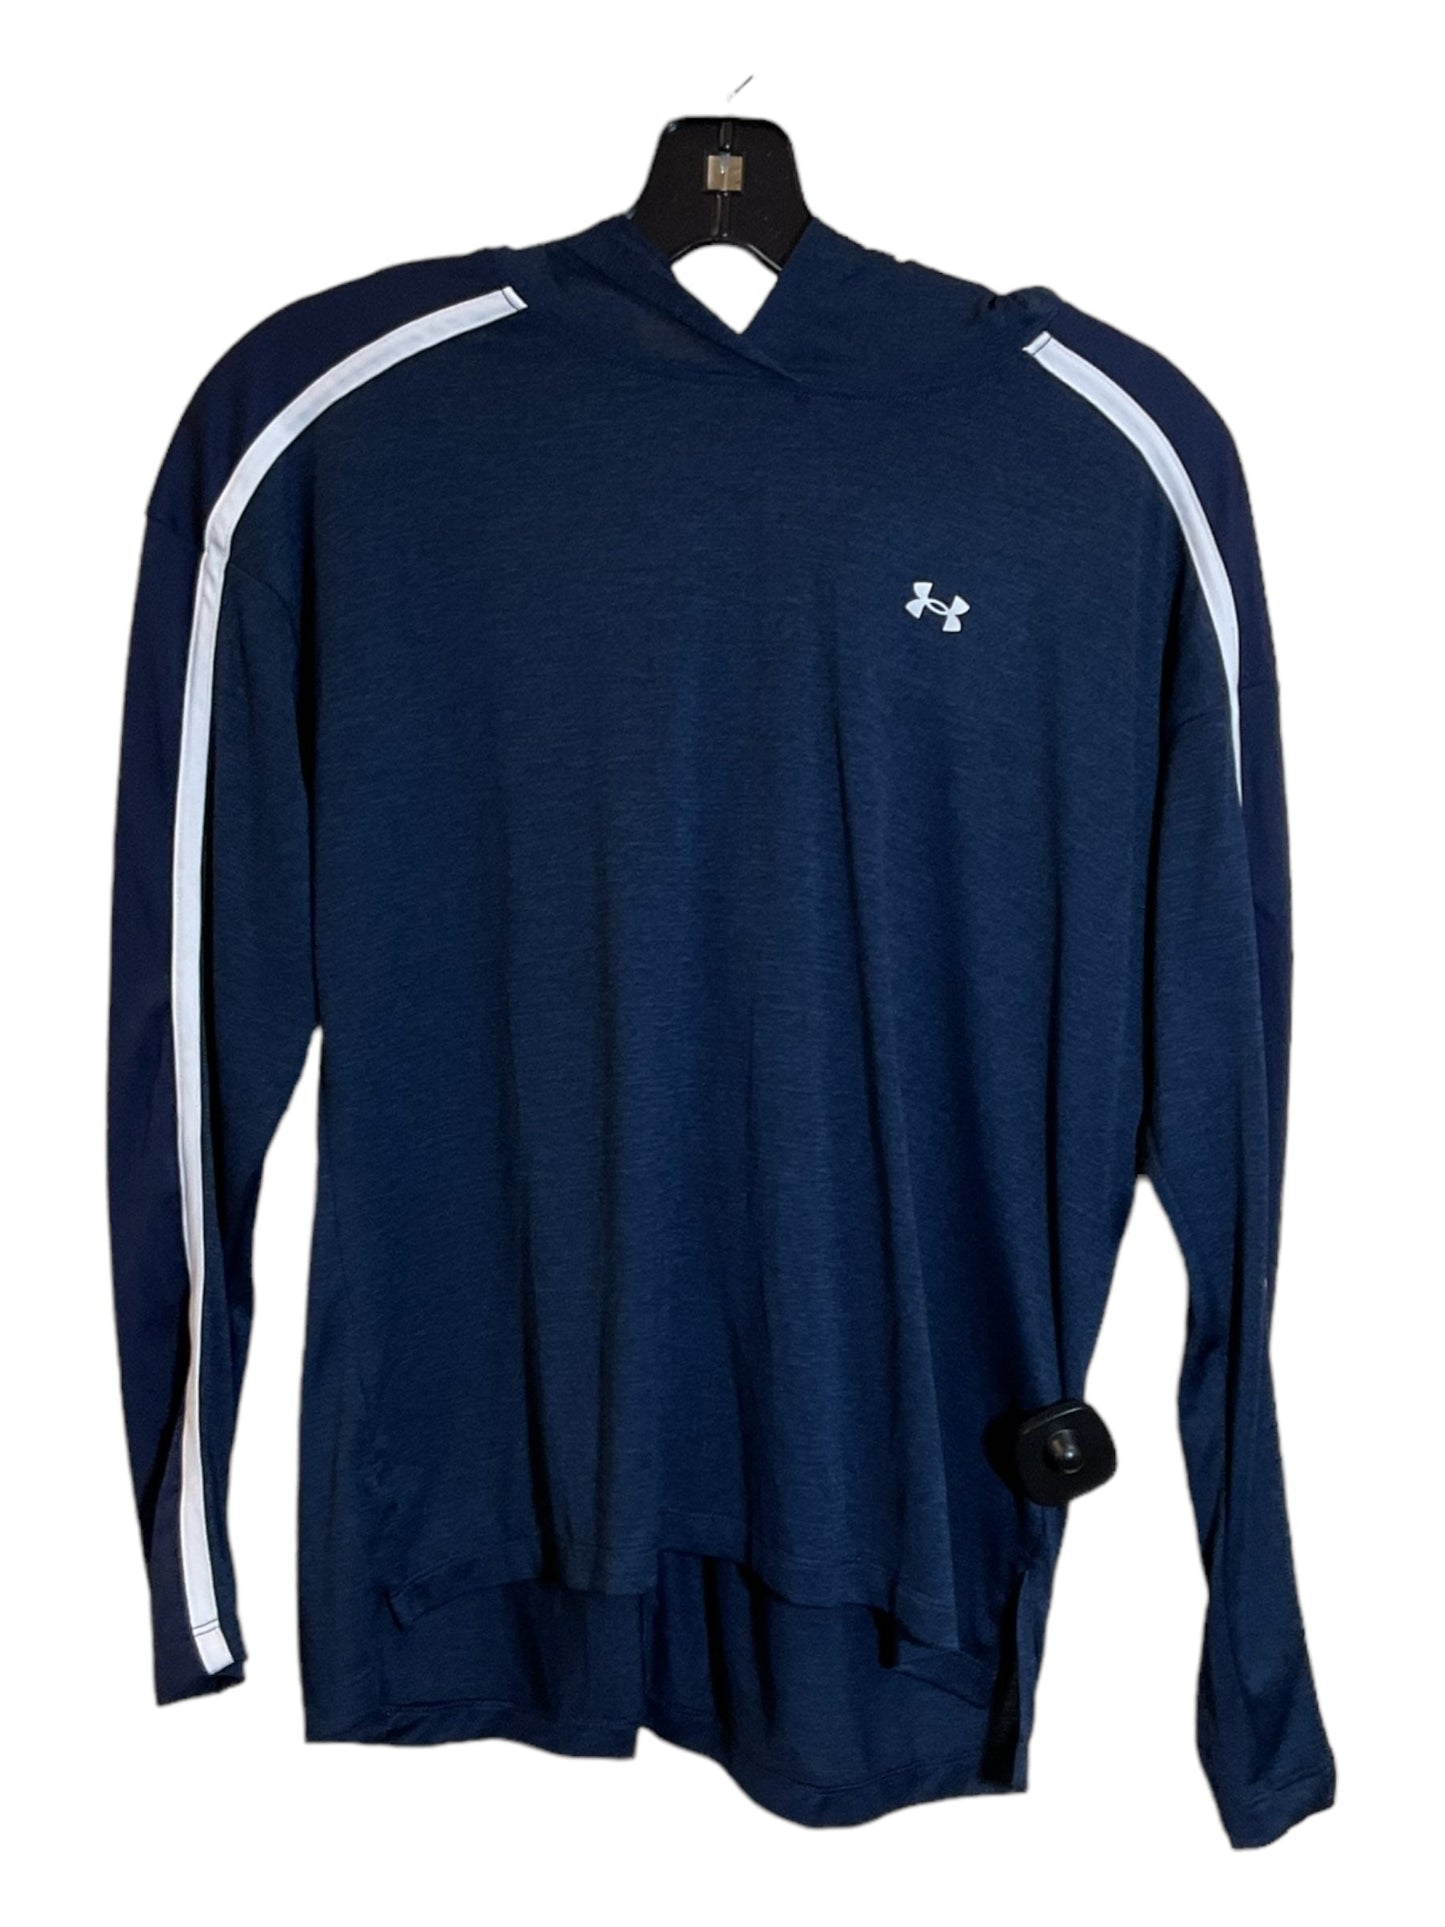 Blue Athletic Top Long Sleeve Collar Under Armour, Size Xs